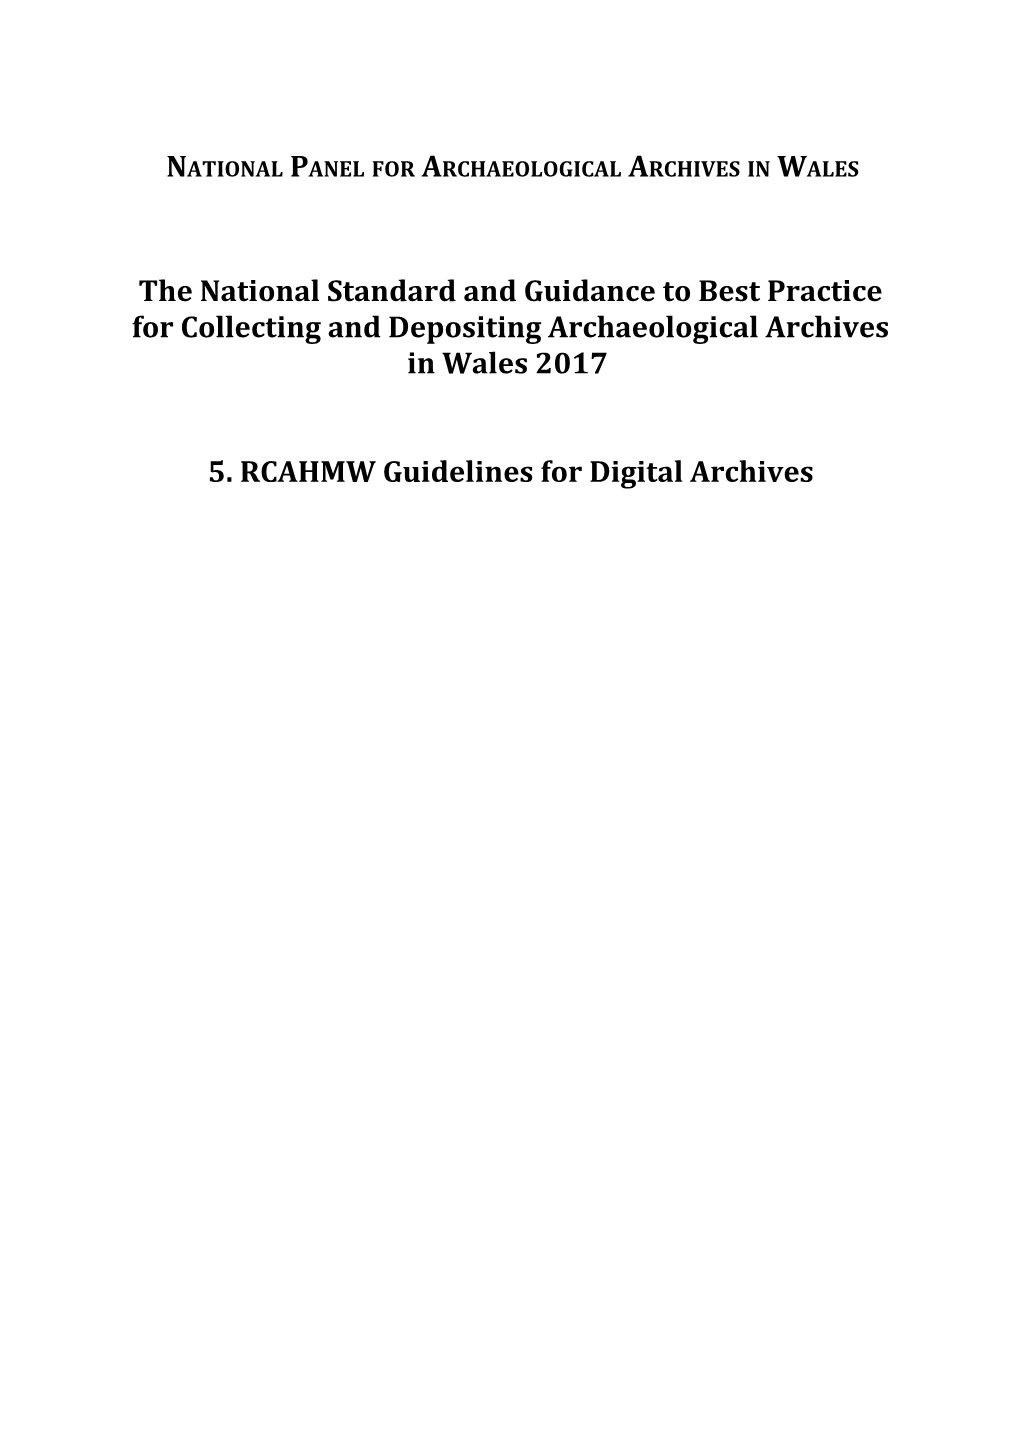 Rcahmw Guidelines for Digital Archives